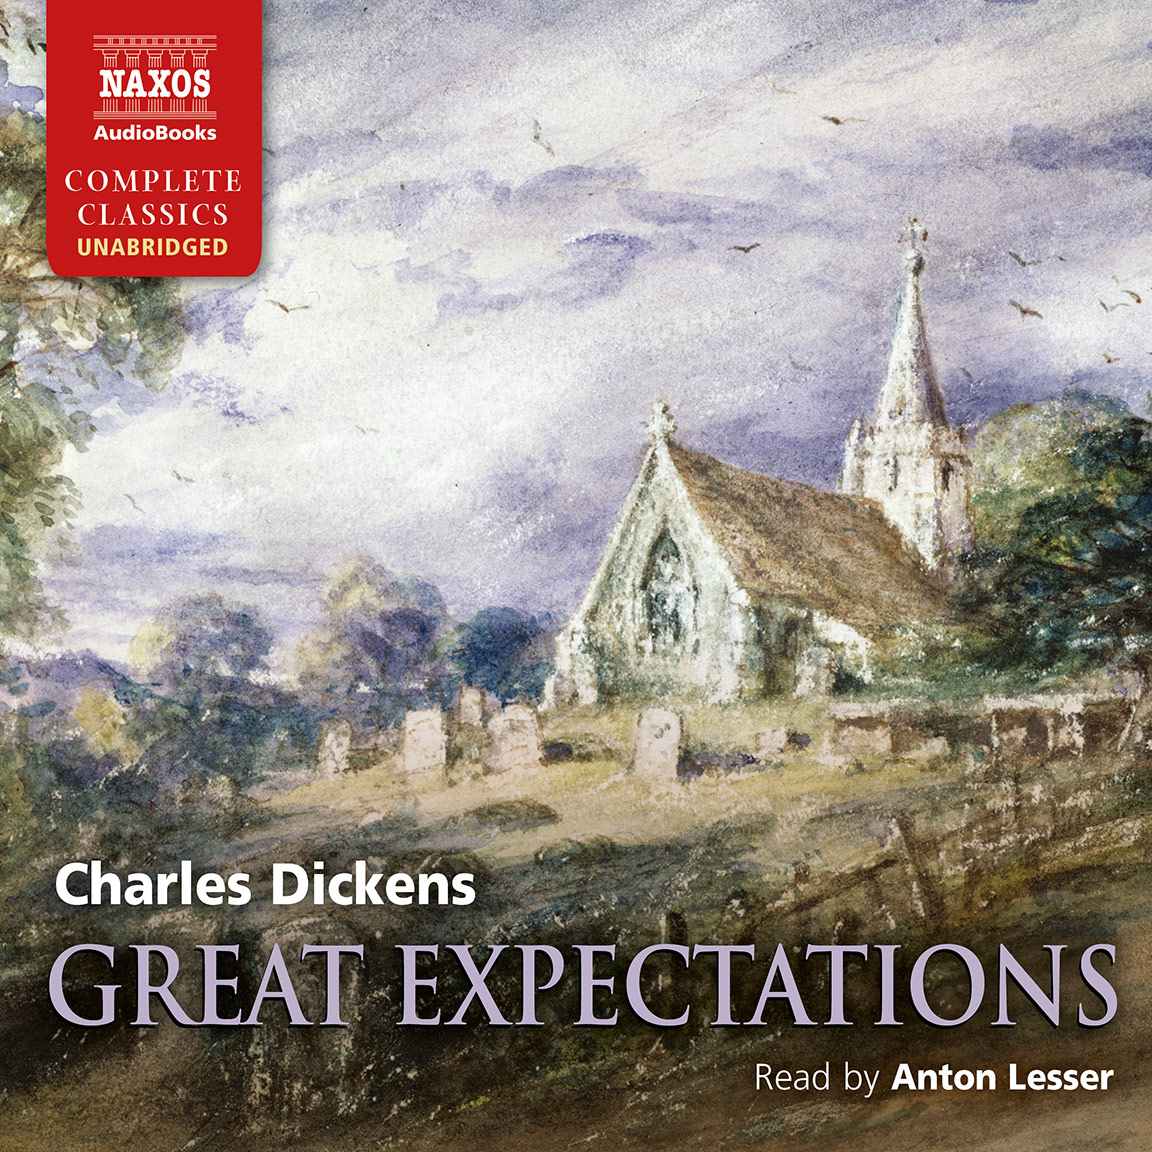 Great Expectations (unabridged)